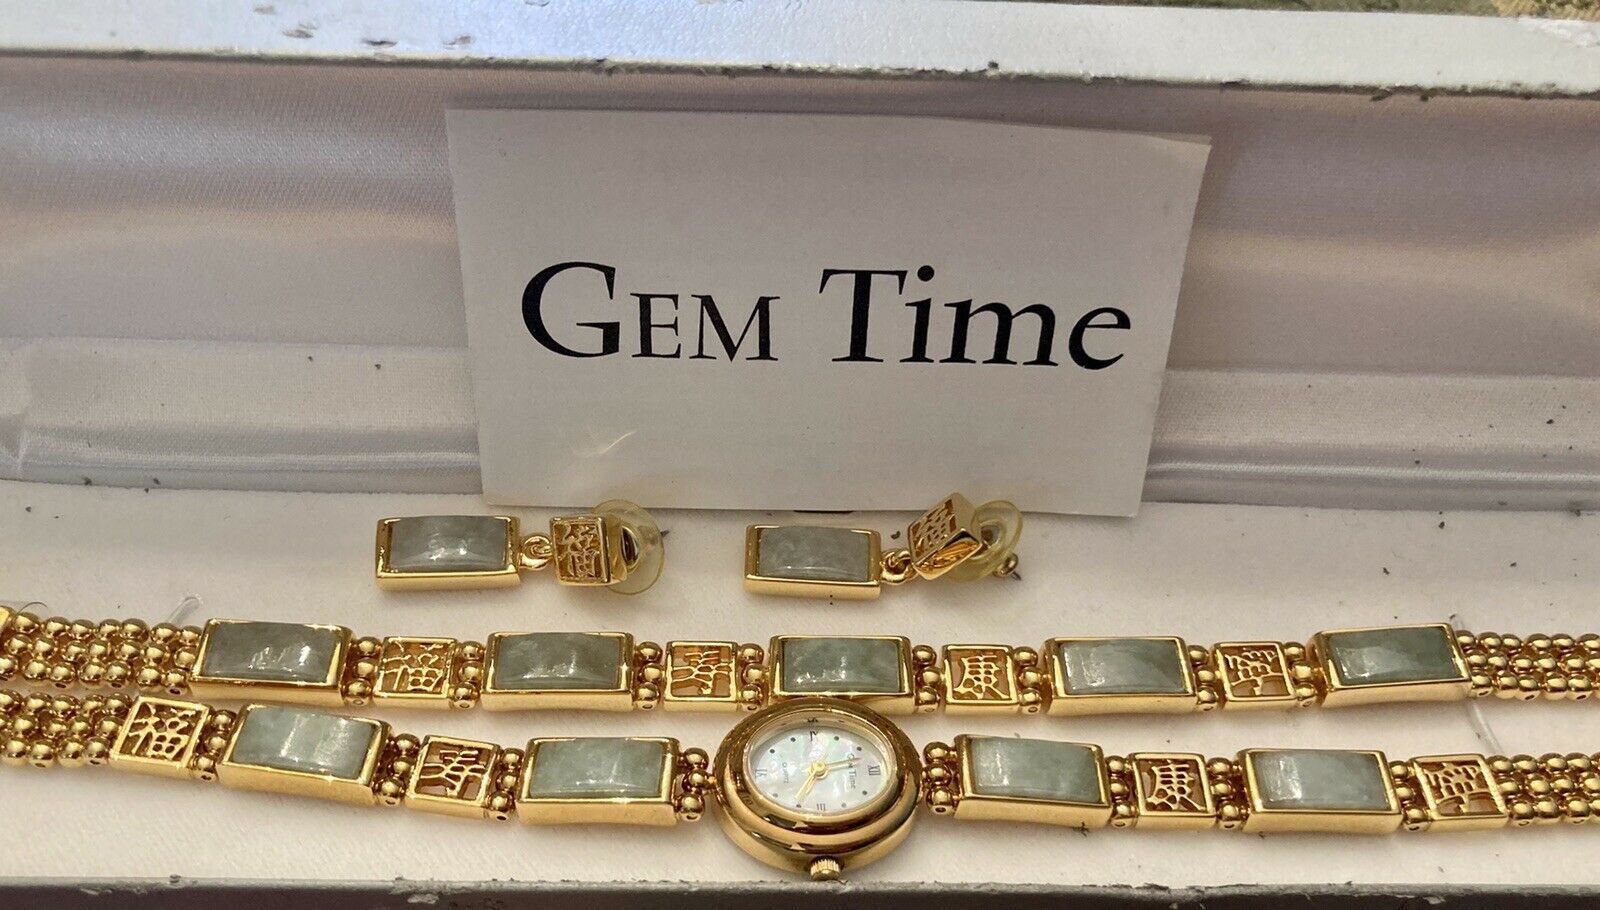 Gem Time Watch And Matching Jewelry